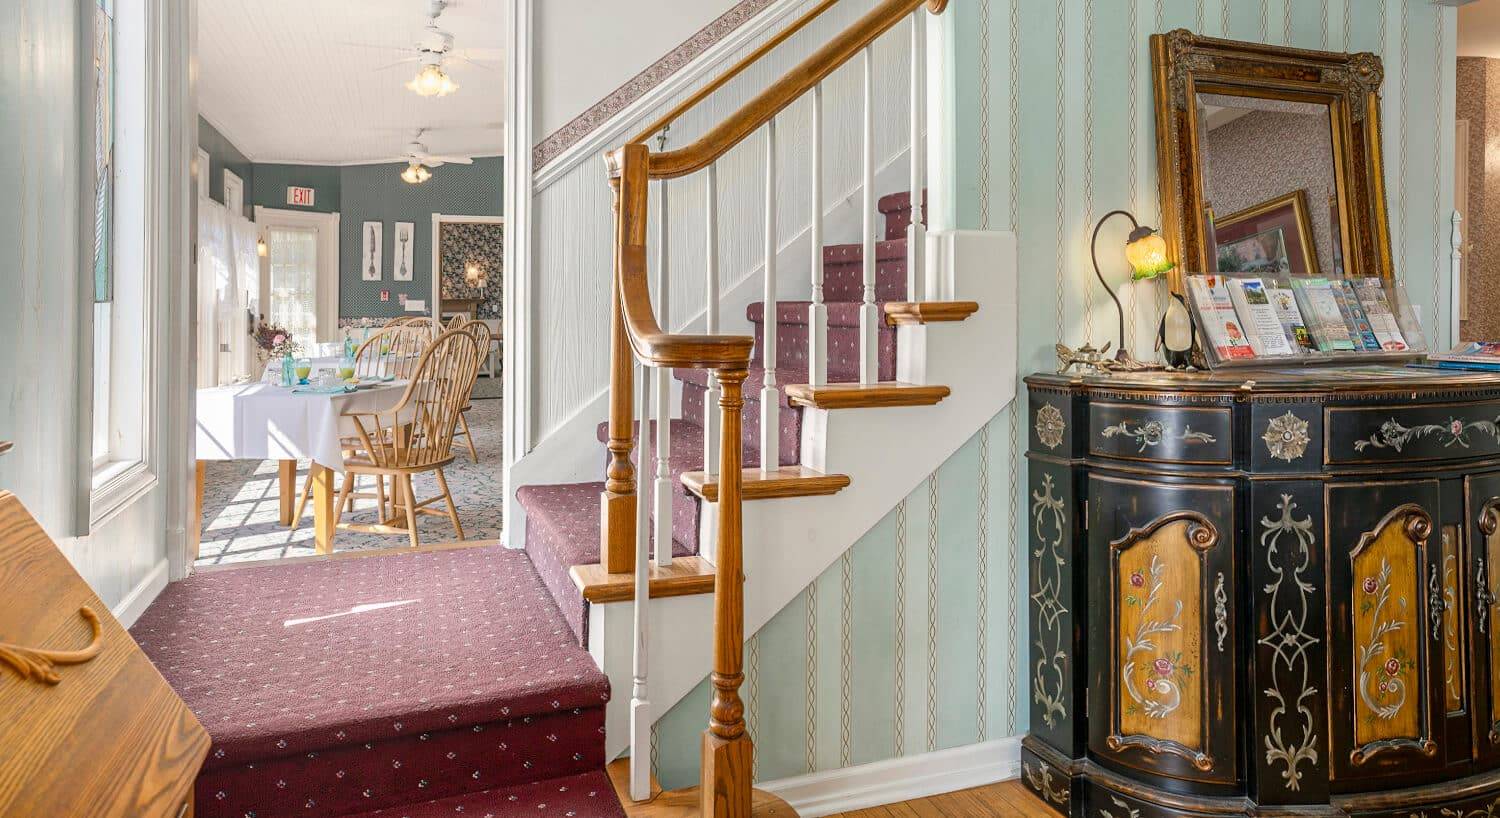 A staircase going up to a second floor, and 2 rooms on either side, one a dining room with tables and chairs, and the other a living area with antique furnishings.